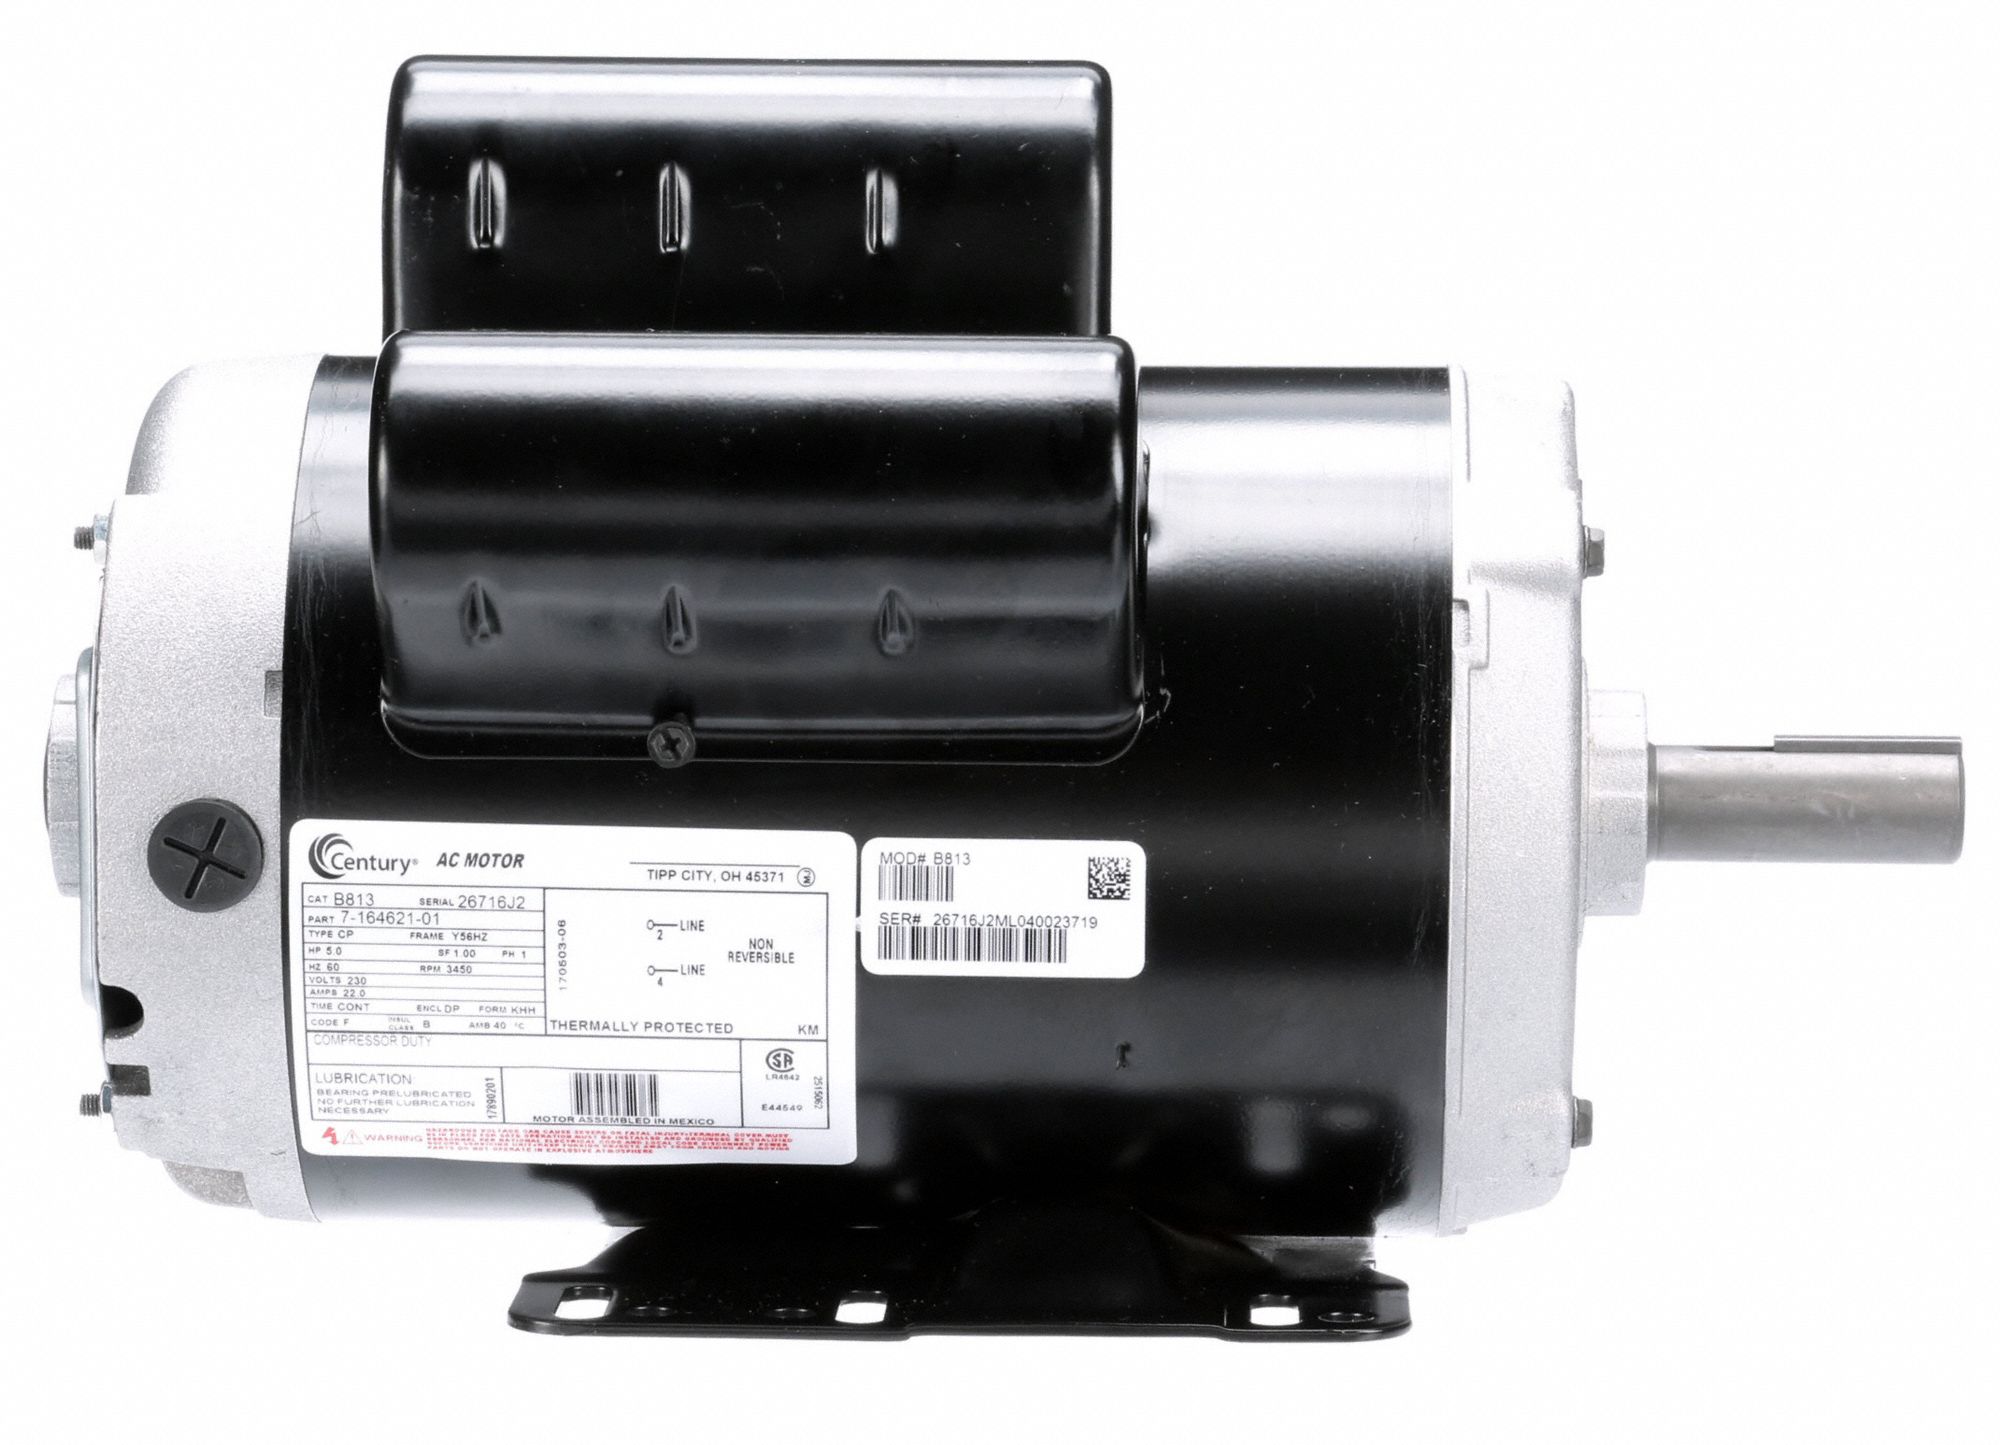 MC006100AJ AIR COMPRESSOR REPLACEMENT MOTOR 240VT 5HP 56FR ONE PHASE 